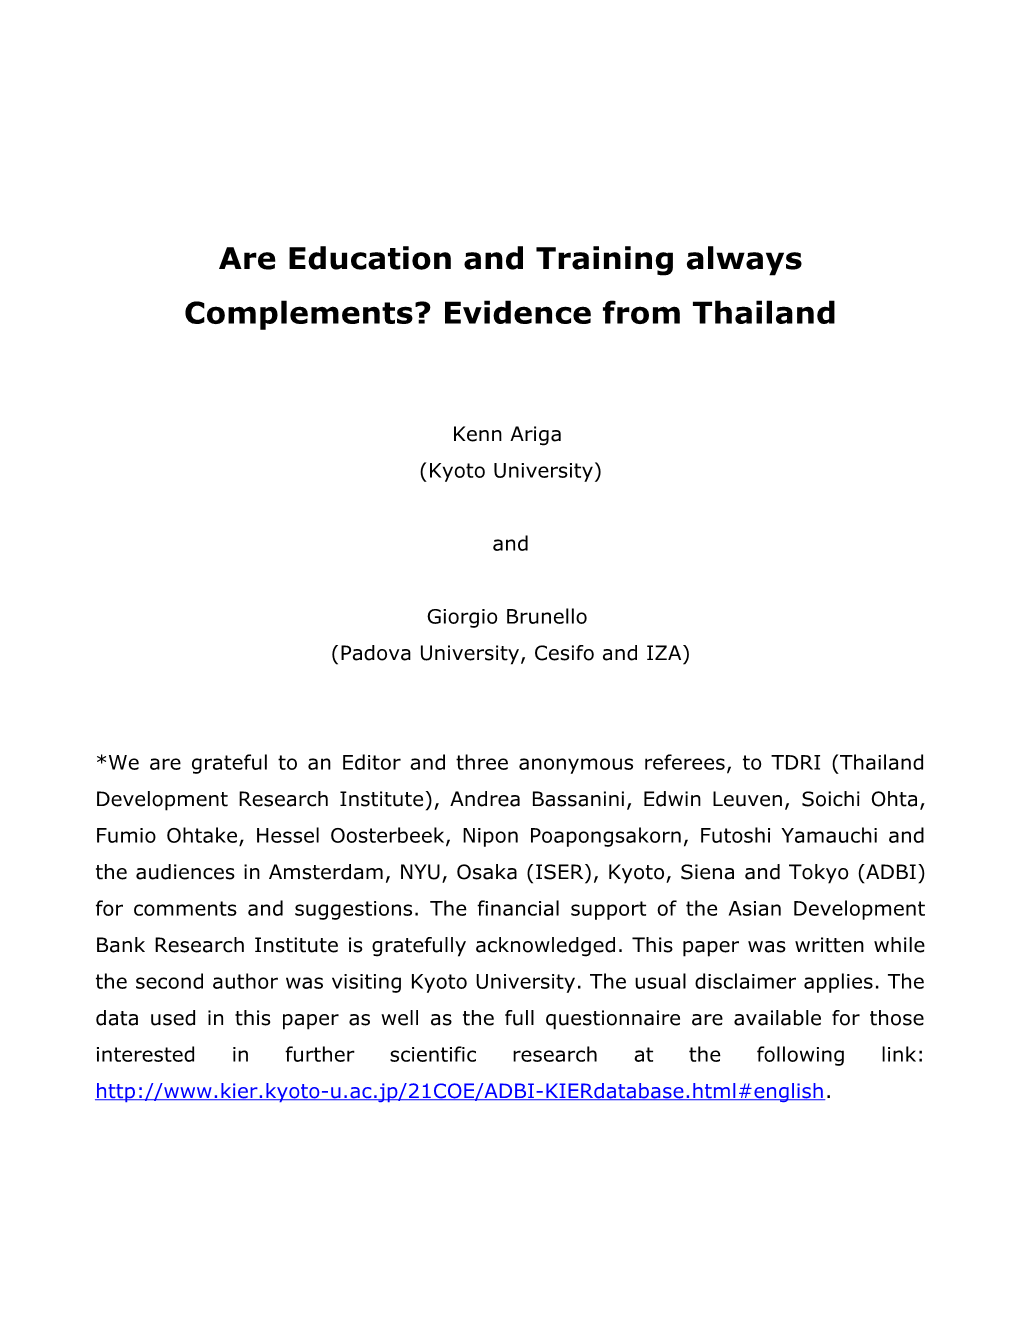 Are Education and Training Always Complements? Evidence from Thailand